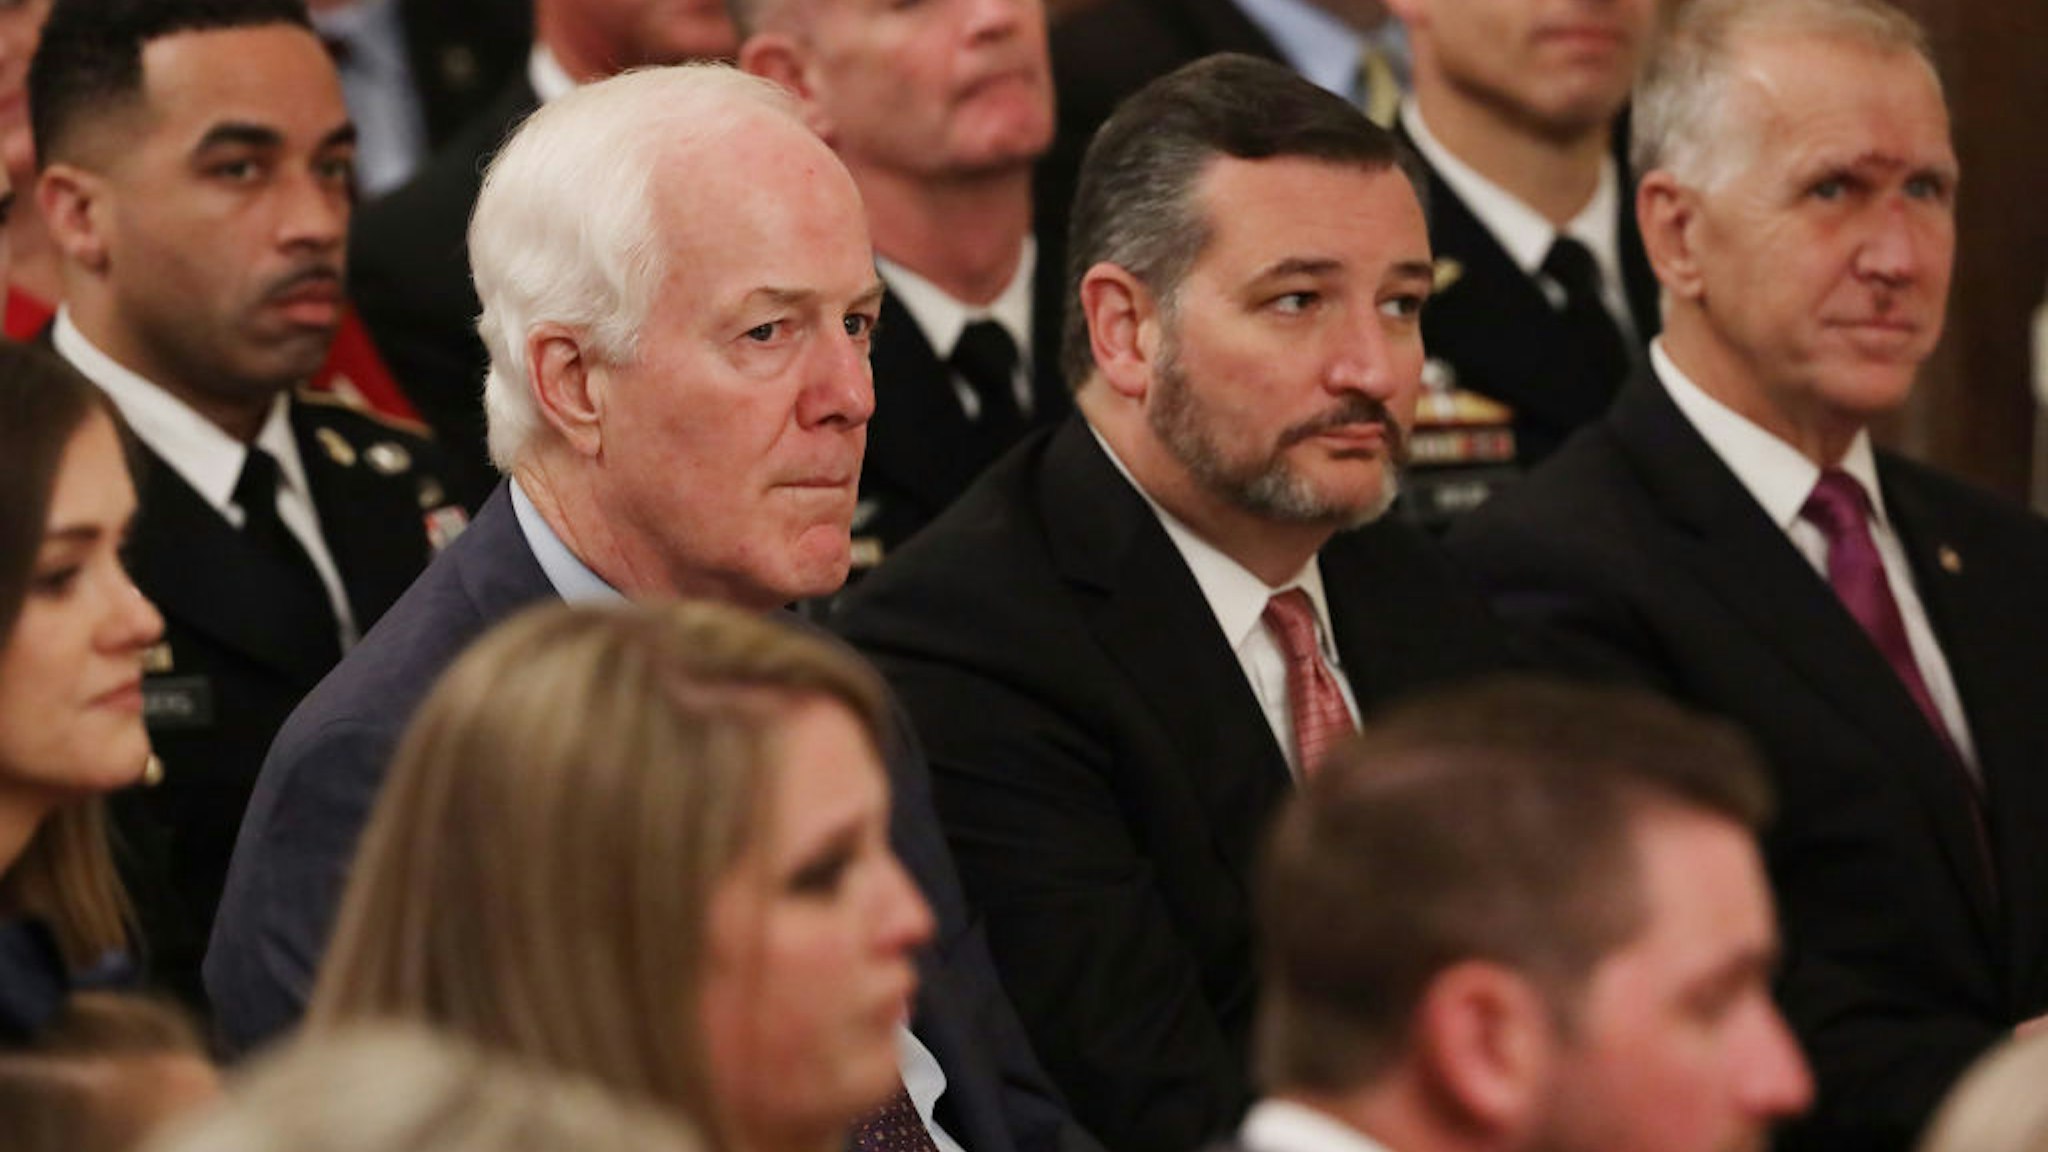 Senate Majority Whip John Cornyn (R-TX), Sen. Ted Cruz (R-TX) and Sen. Thom Tillis (R-NC) attend the Medal of Honor ceremony for U.S. Army Master Sgt. Matthew Williams of Boerne, Texas, in the East Room of the White House October 30, 2019 in Washington, DC.